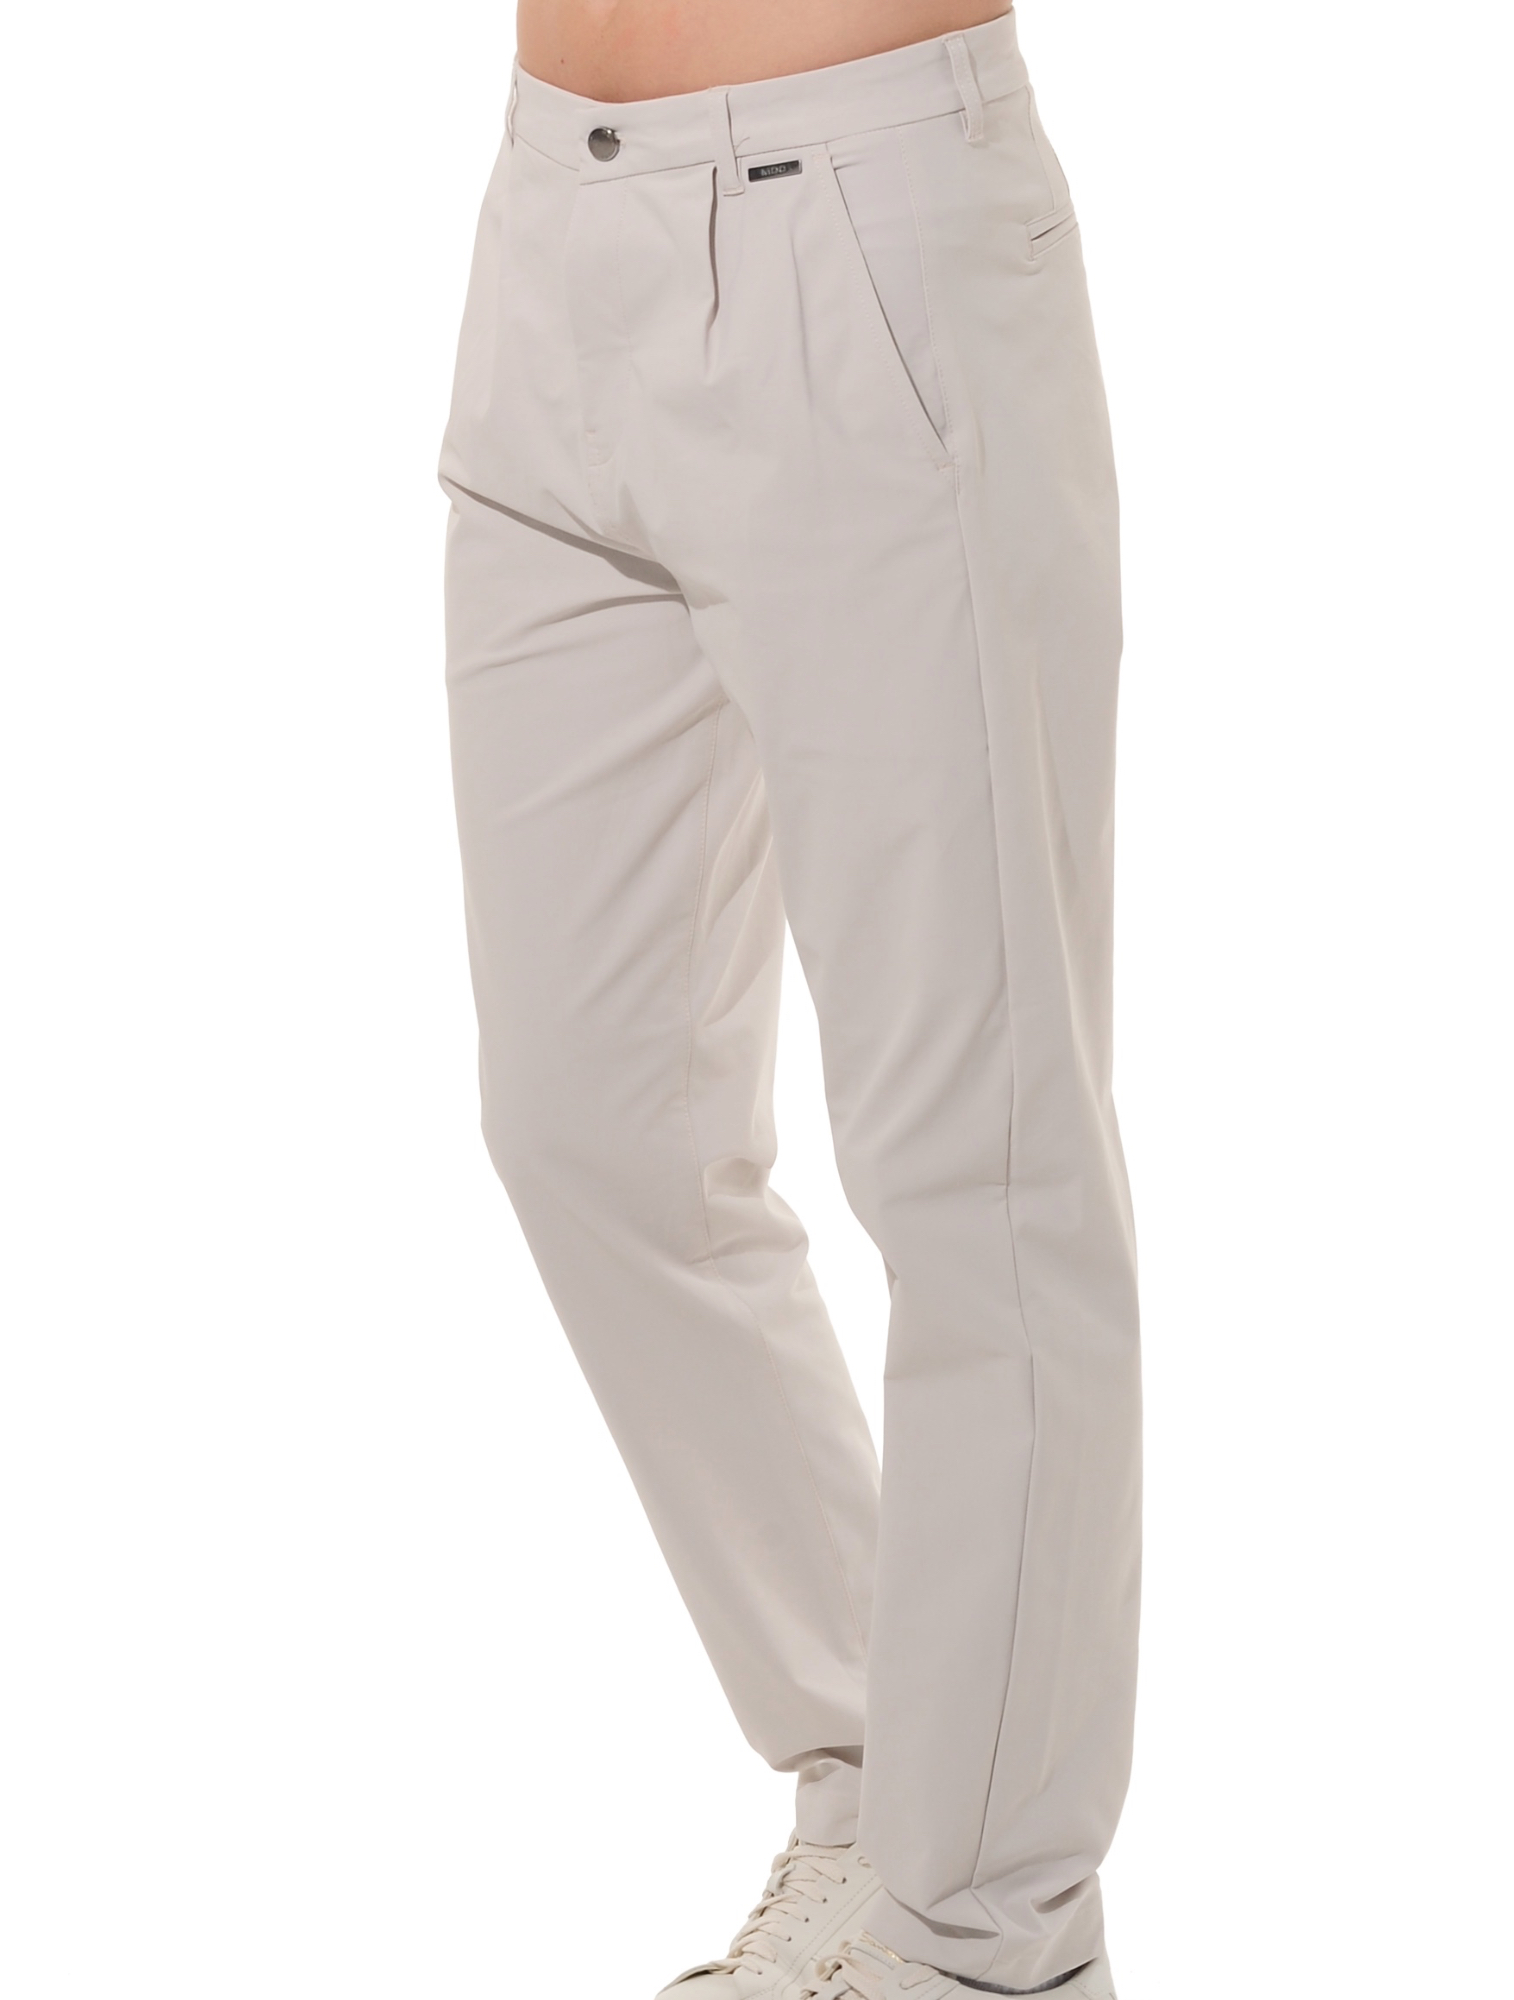 4way stretch relaxed fit chinos linen 